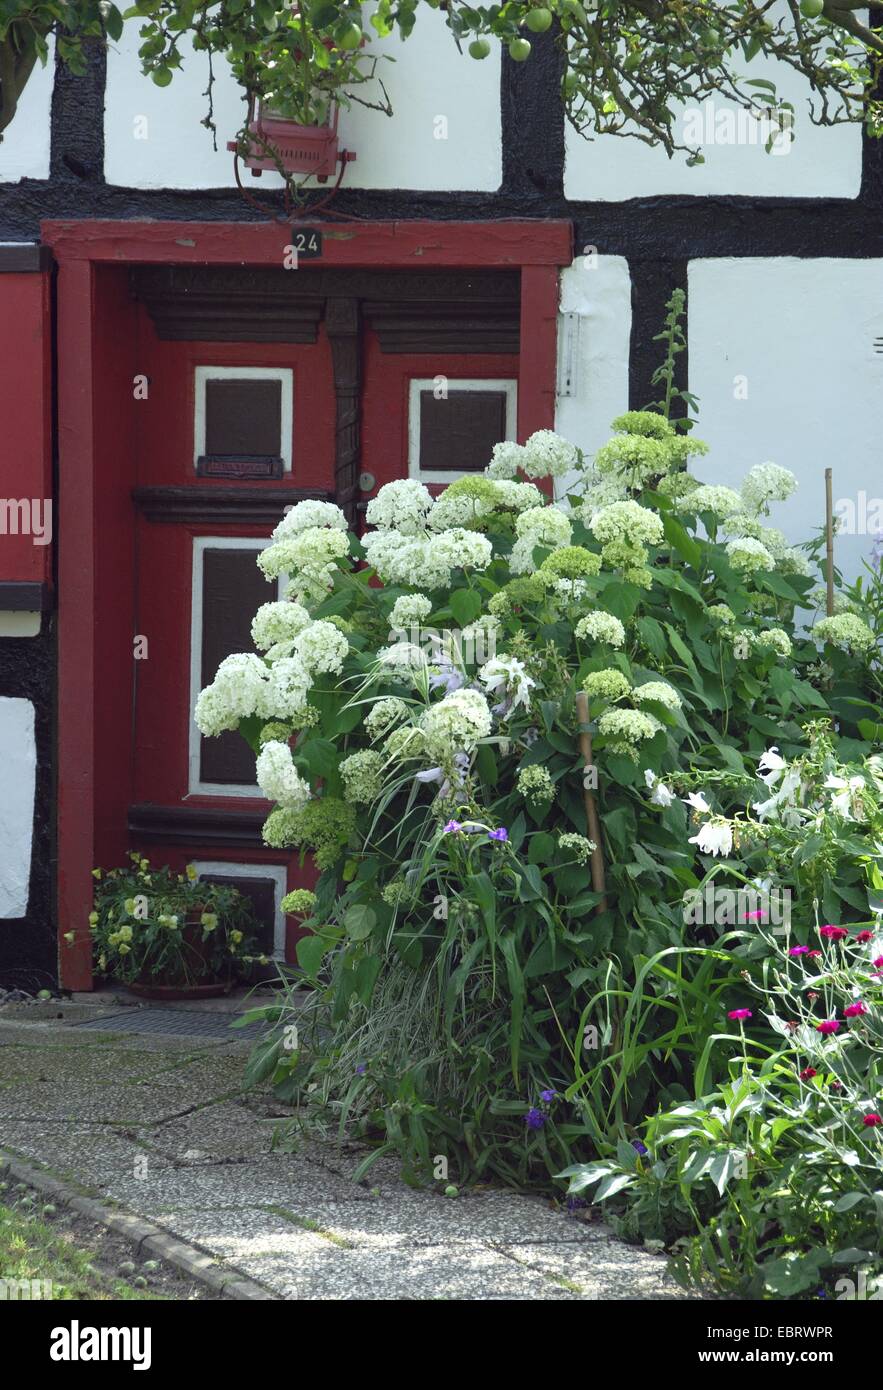 wild hydrangea (Hydrangea arborescens 'Grandiflora', Hydrangea arborescens Grandiflora), cultivar Grandiflora, blooming in a forgearden of a timbered house, Germany Stock Photo